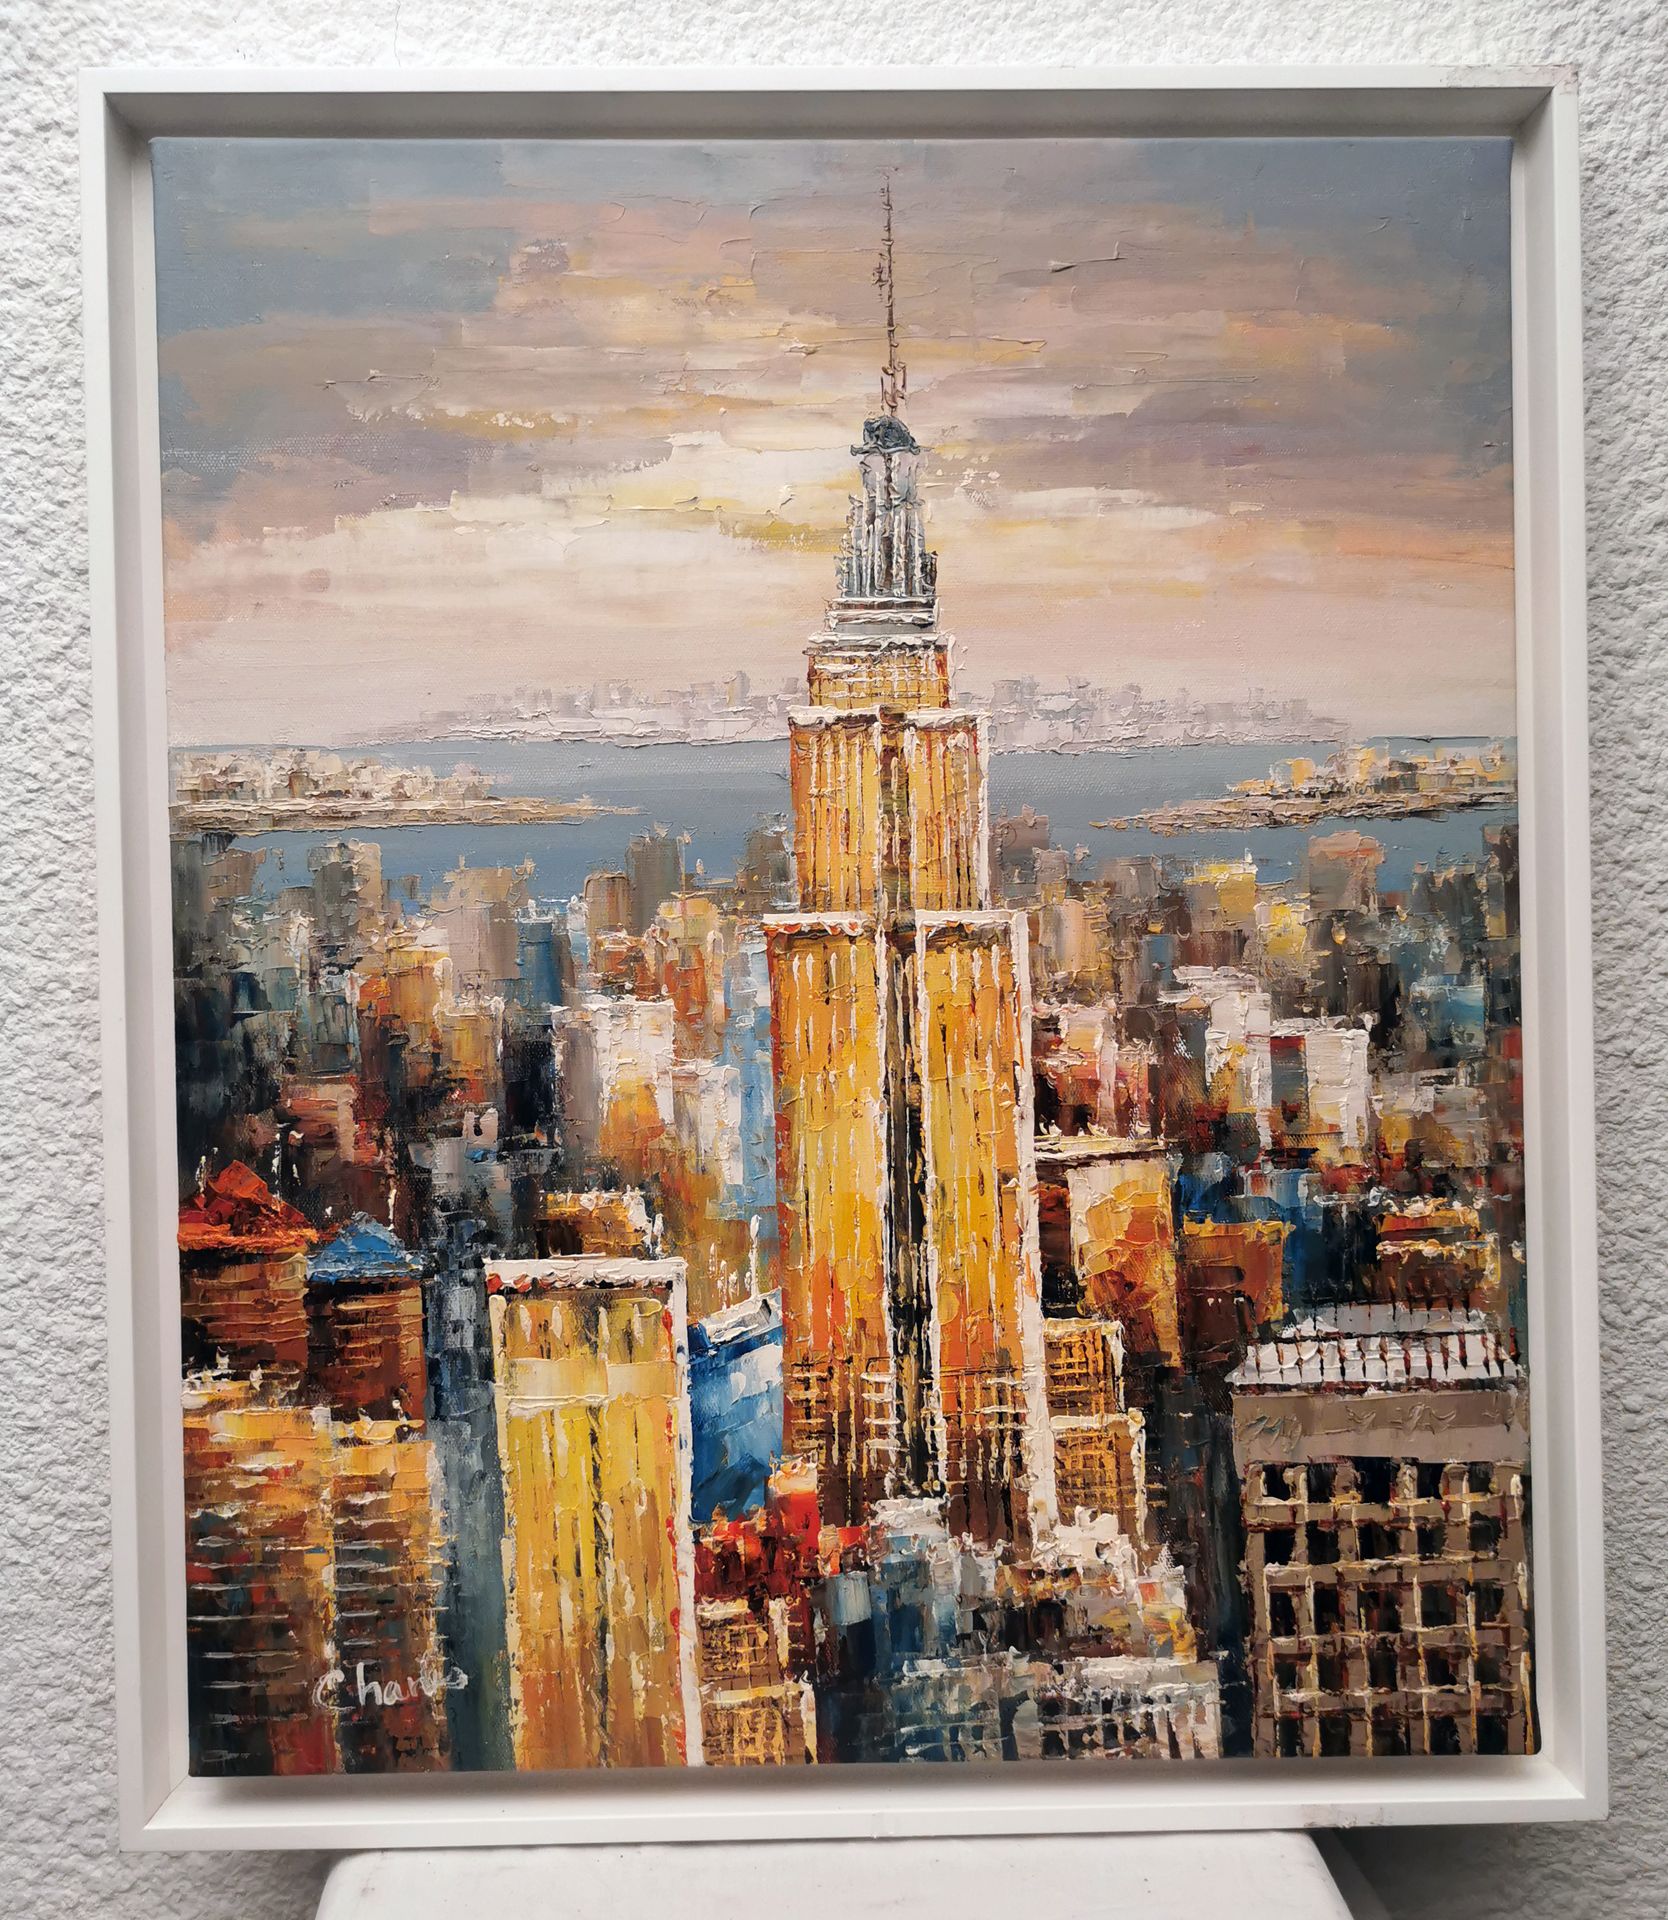 Charles SBG CHARLES SBG "EMPIRE STATE BUILDING" HST FRAME U.S. 55X65 AND 59,5X70